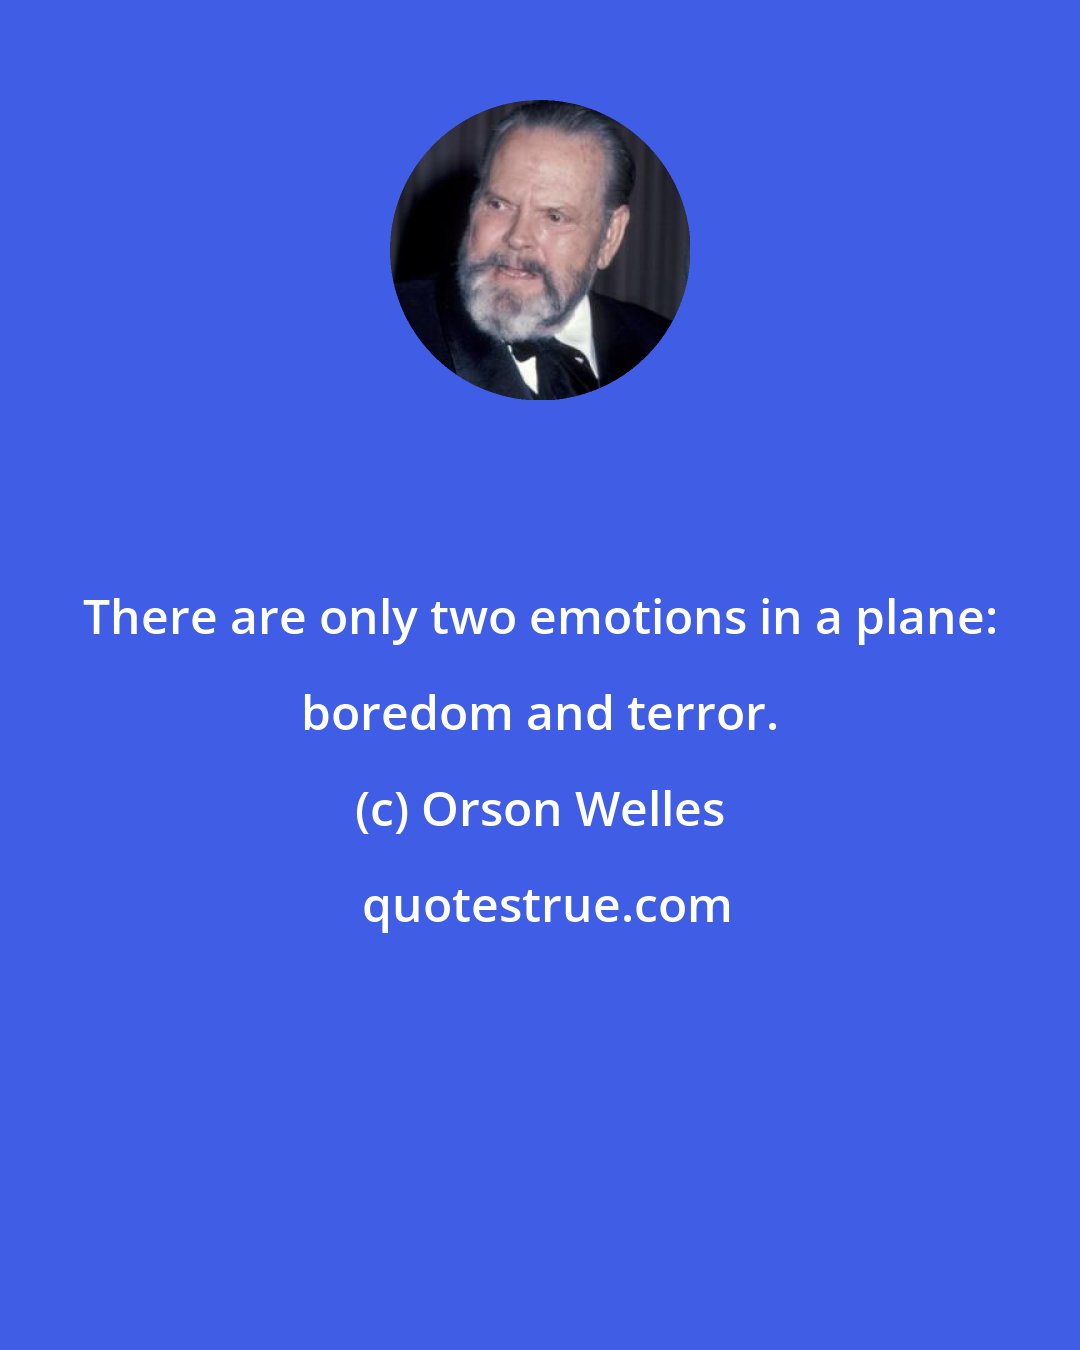 Orson Welles: There are only two emotions in a plane: boredom and terror.